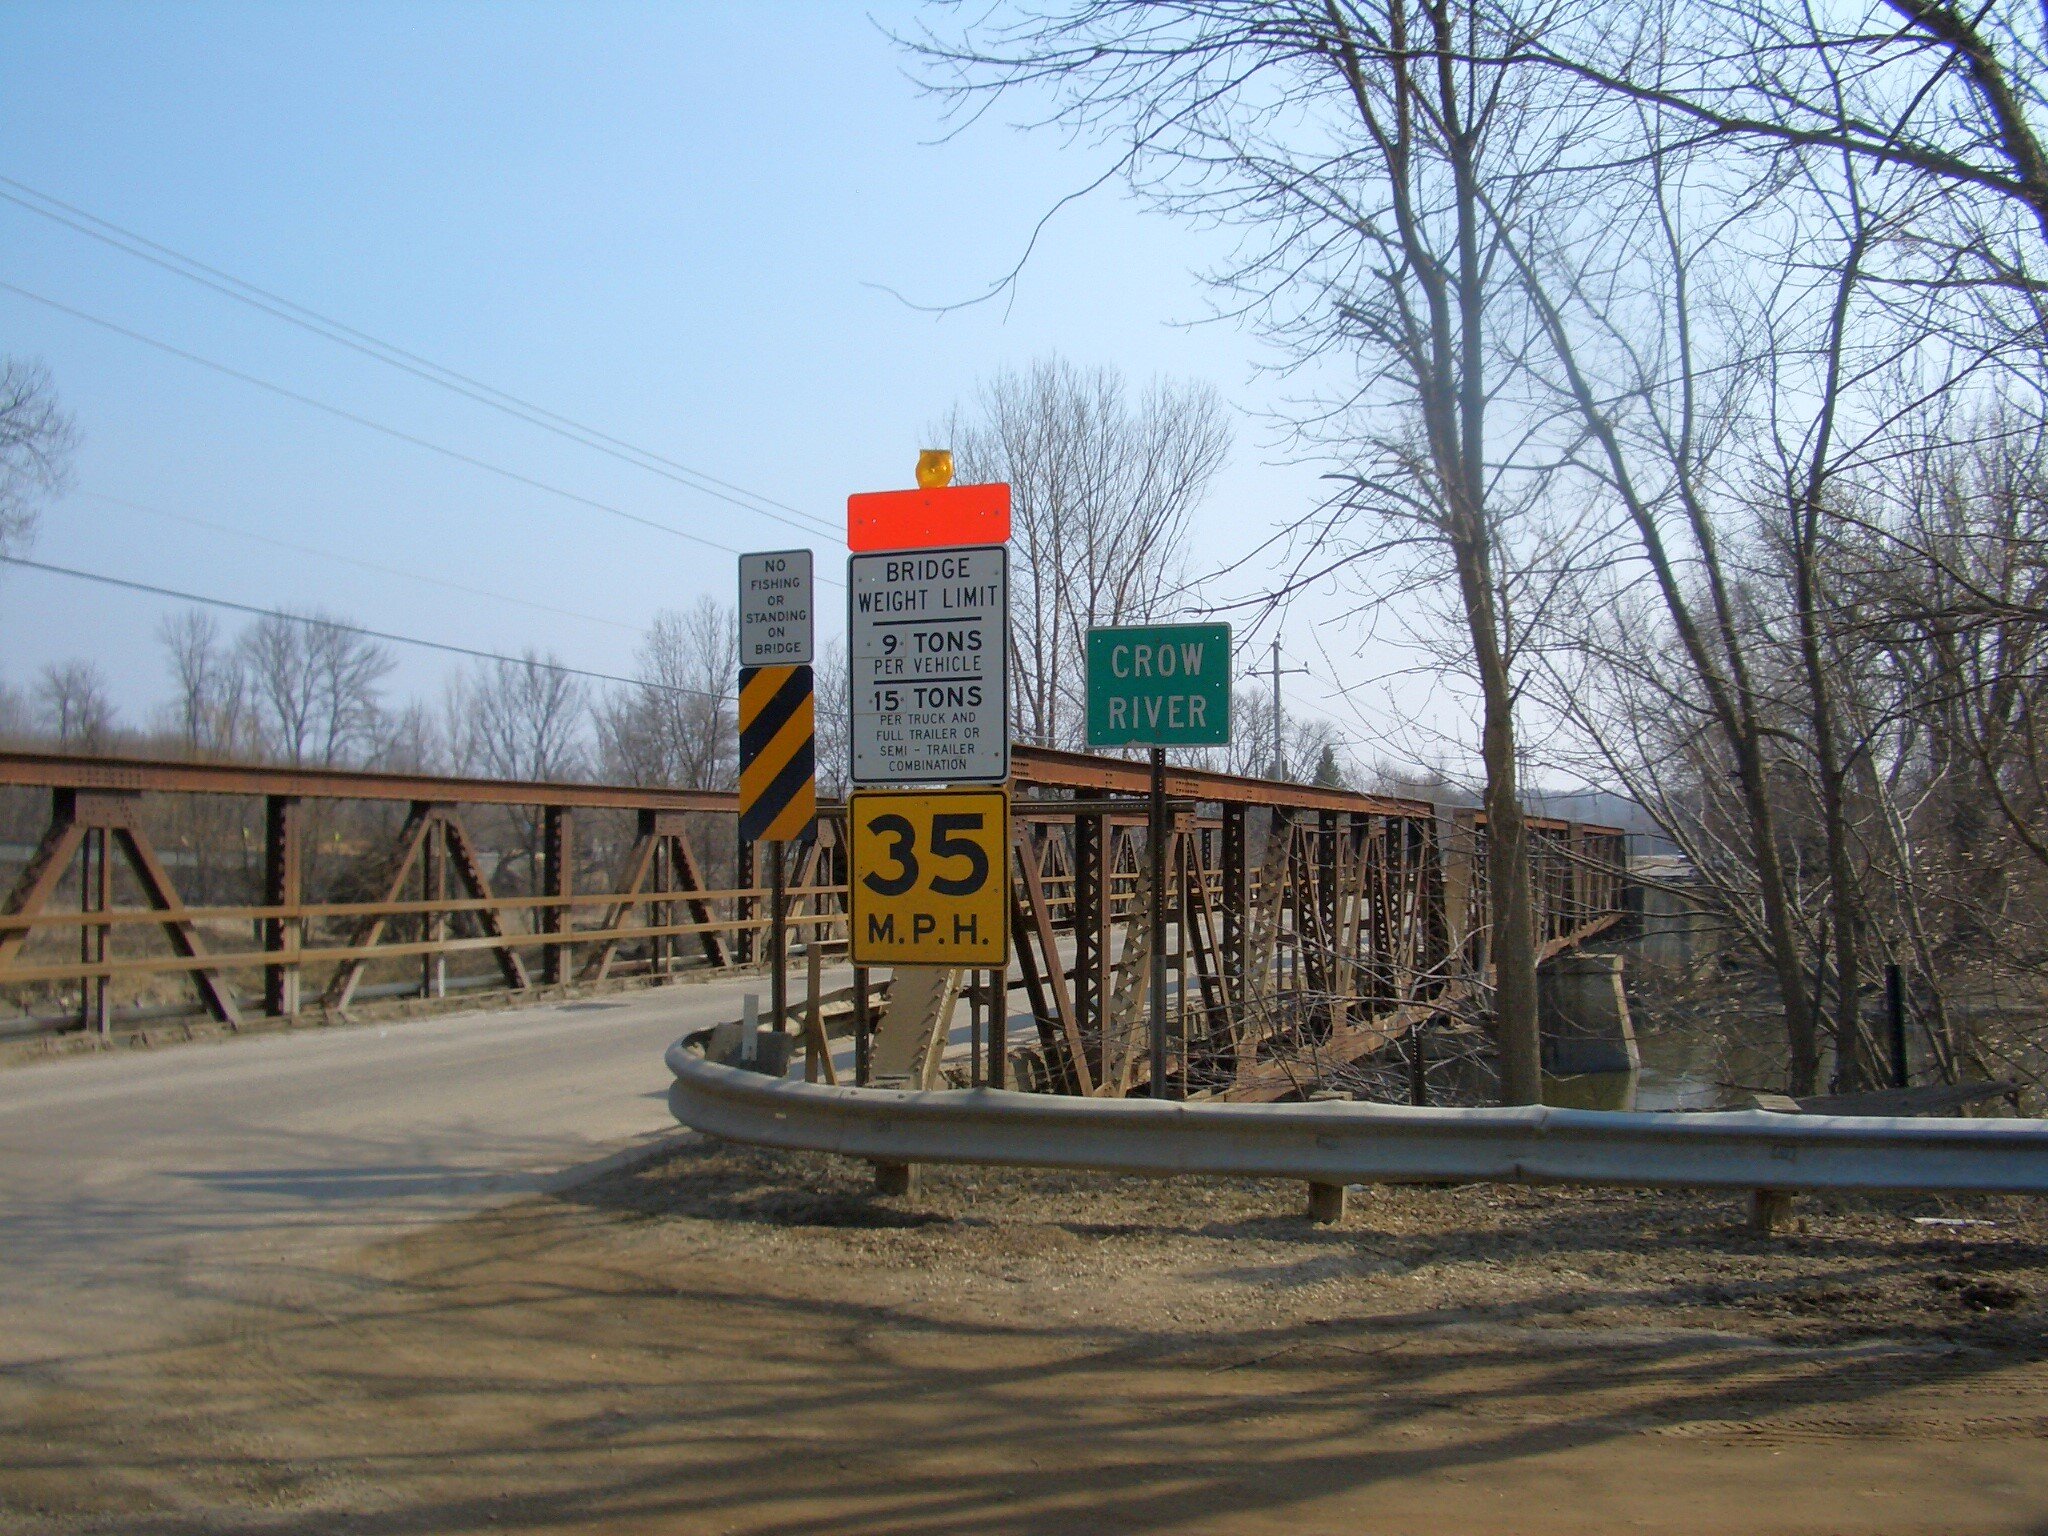 Not long after this photo was taken in 2006, the old bridge crossing the Crow River at Berning&rsquo;s Mill was dismantled. If you&rsquo;ve driven Territorial Road between St. Michael and Fletcher recently, you know how hard it is to imagine how all 